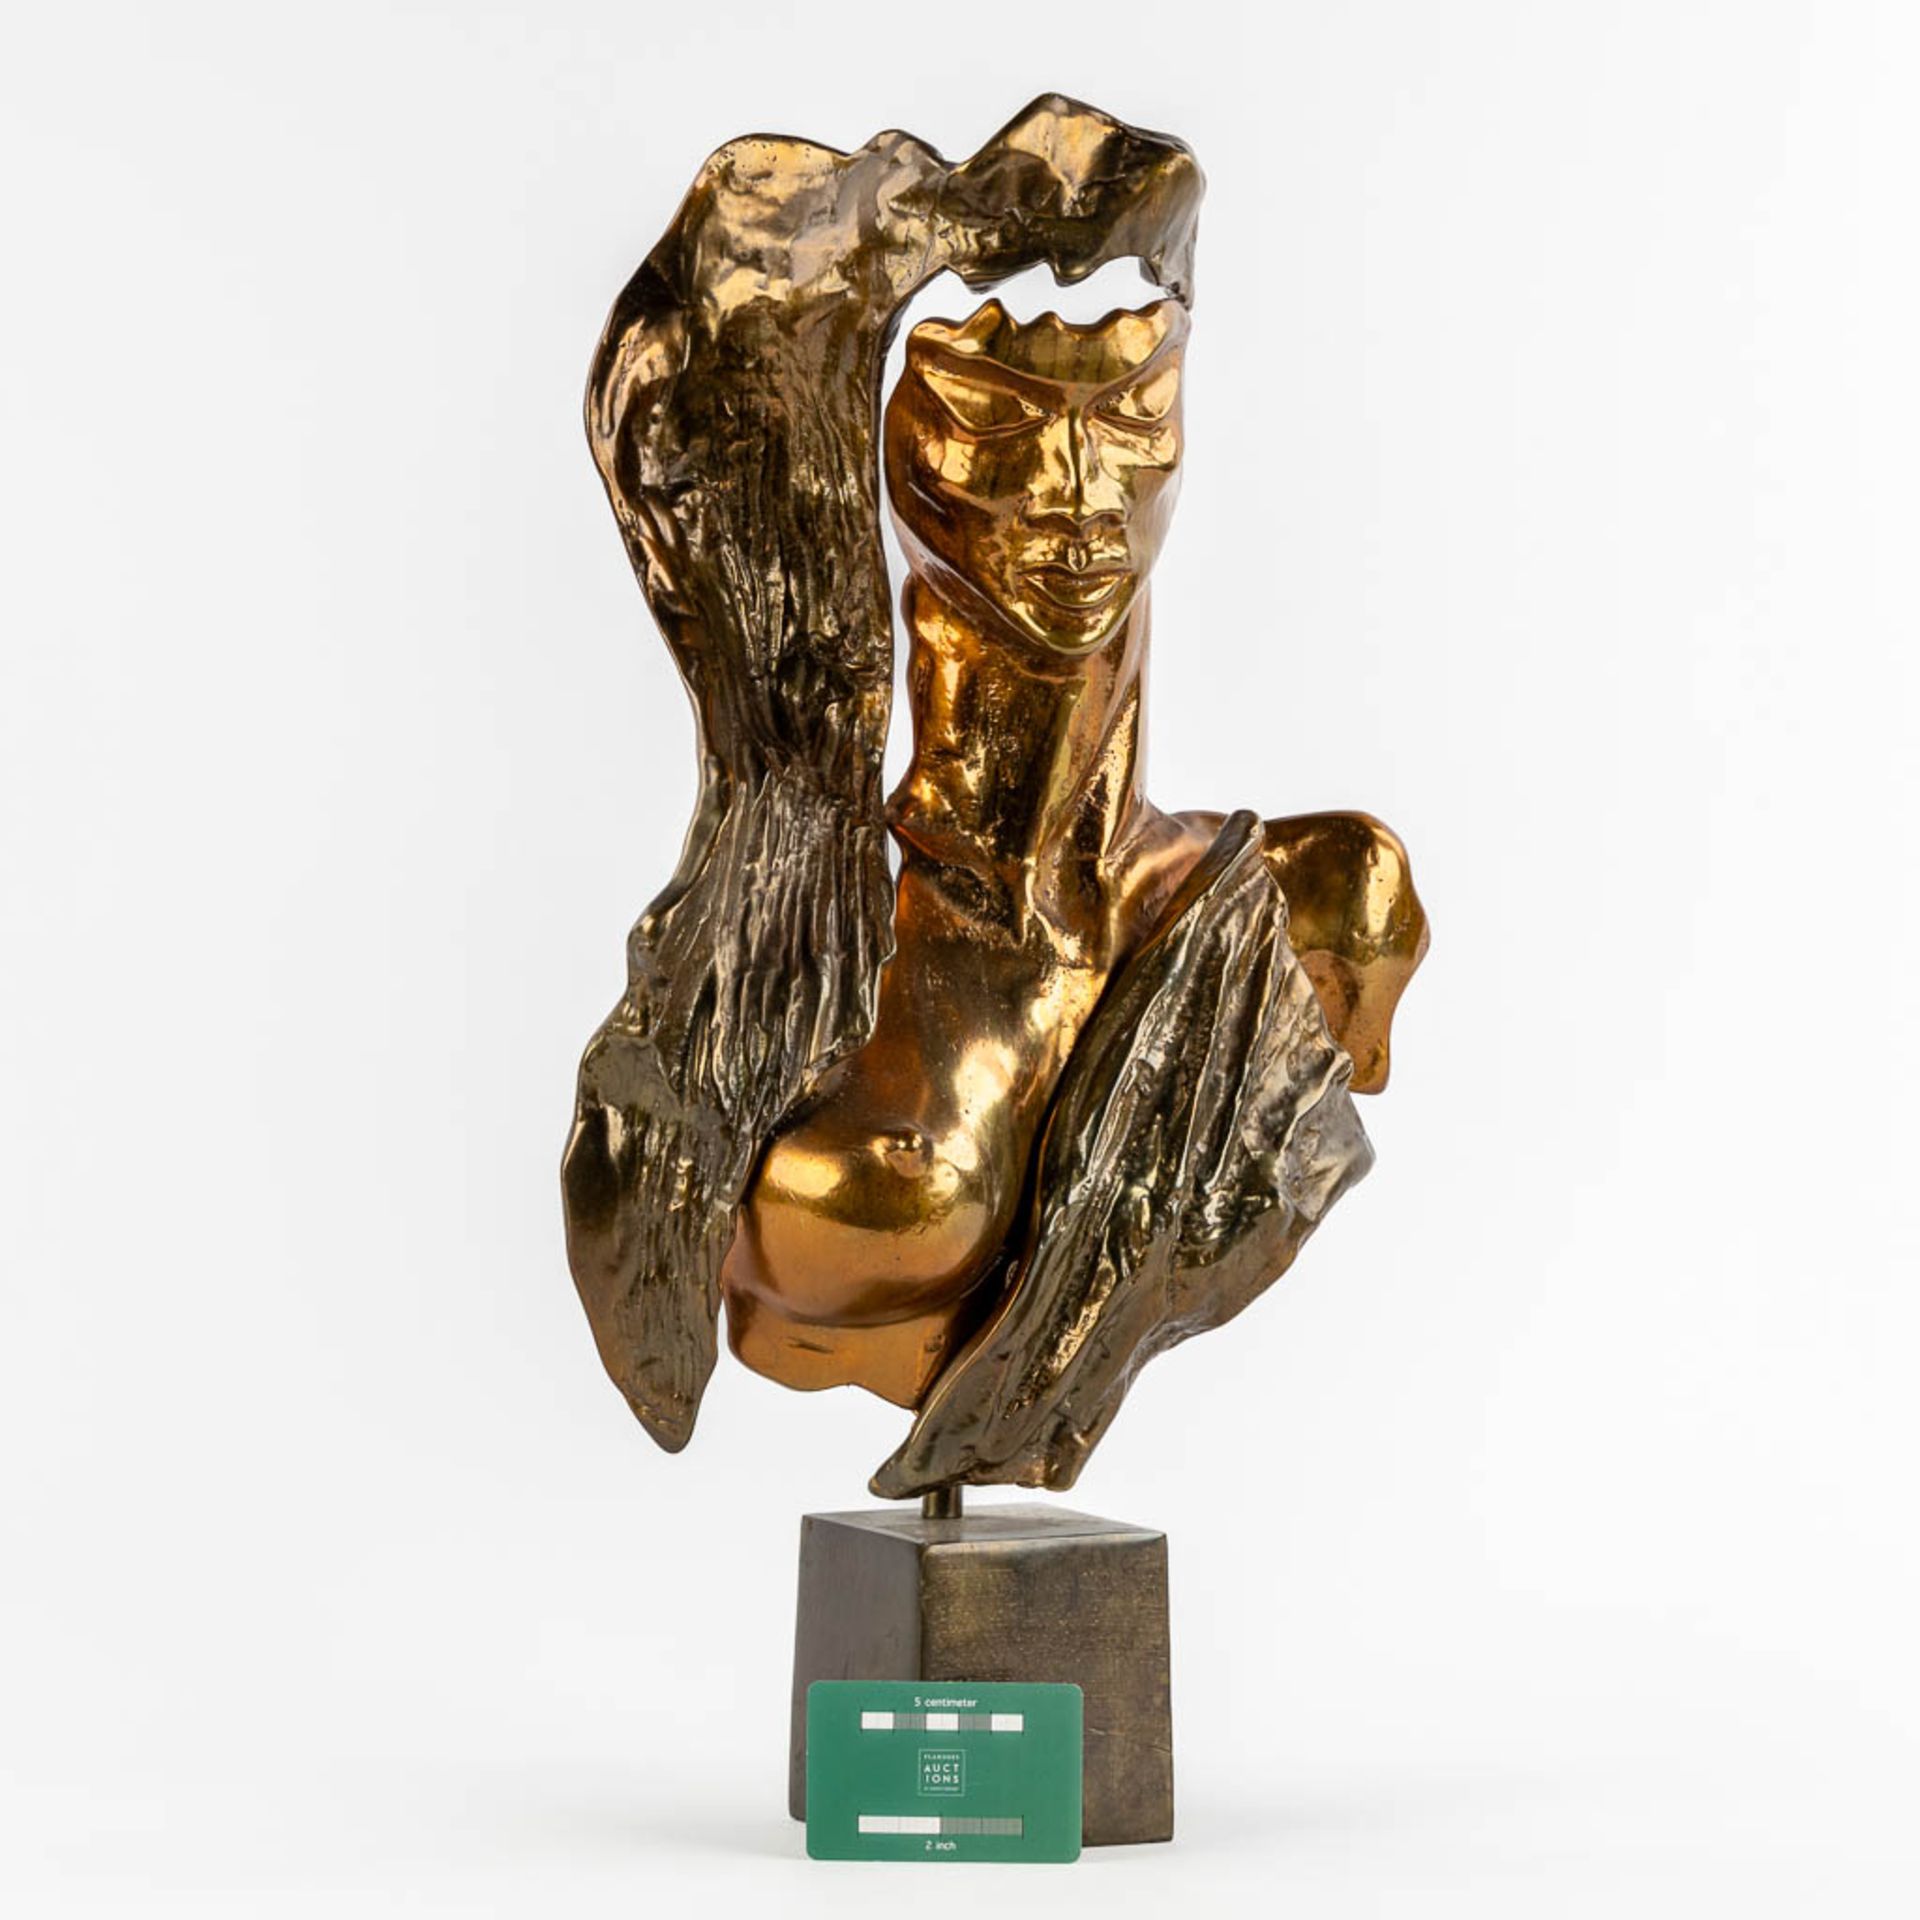 Yves LOHE (1947) 'Figure of a Lady' patinated bronze. (L:13 x W:29 x H:54 cm) - Image 2 of 10